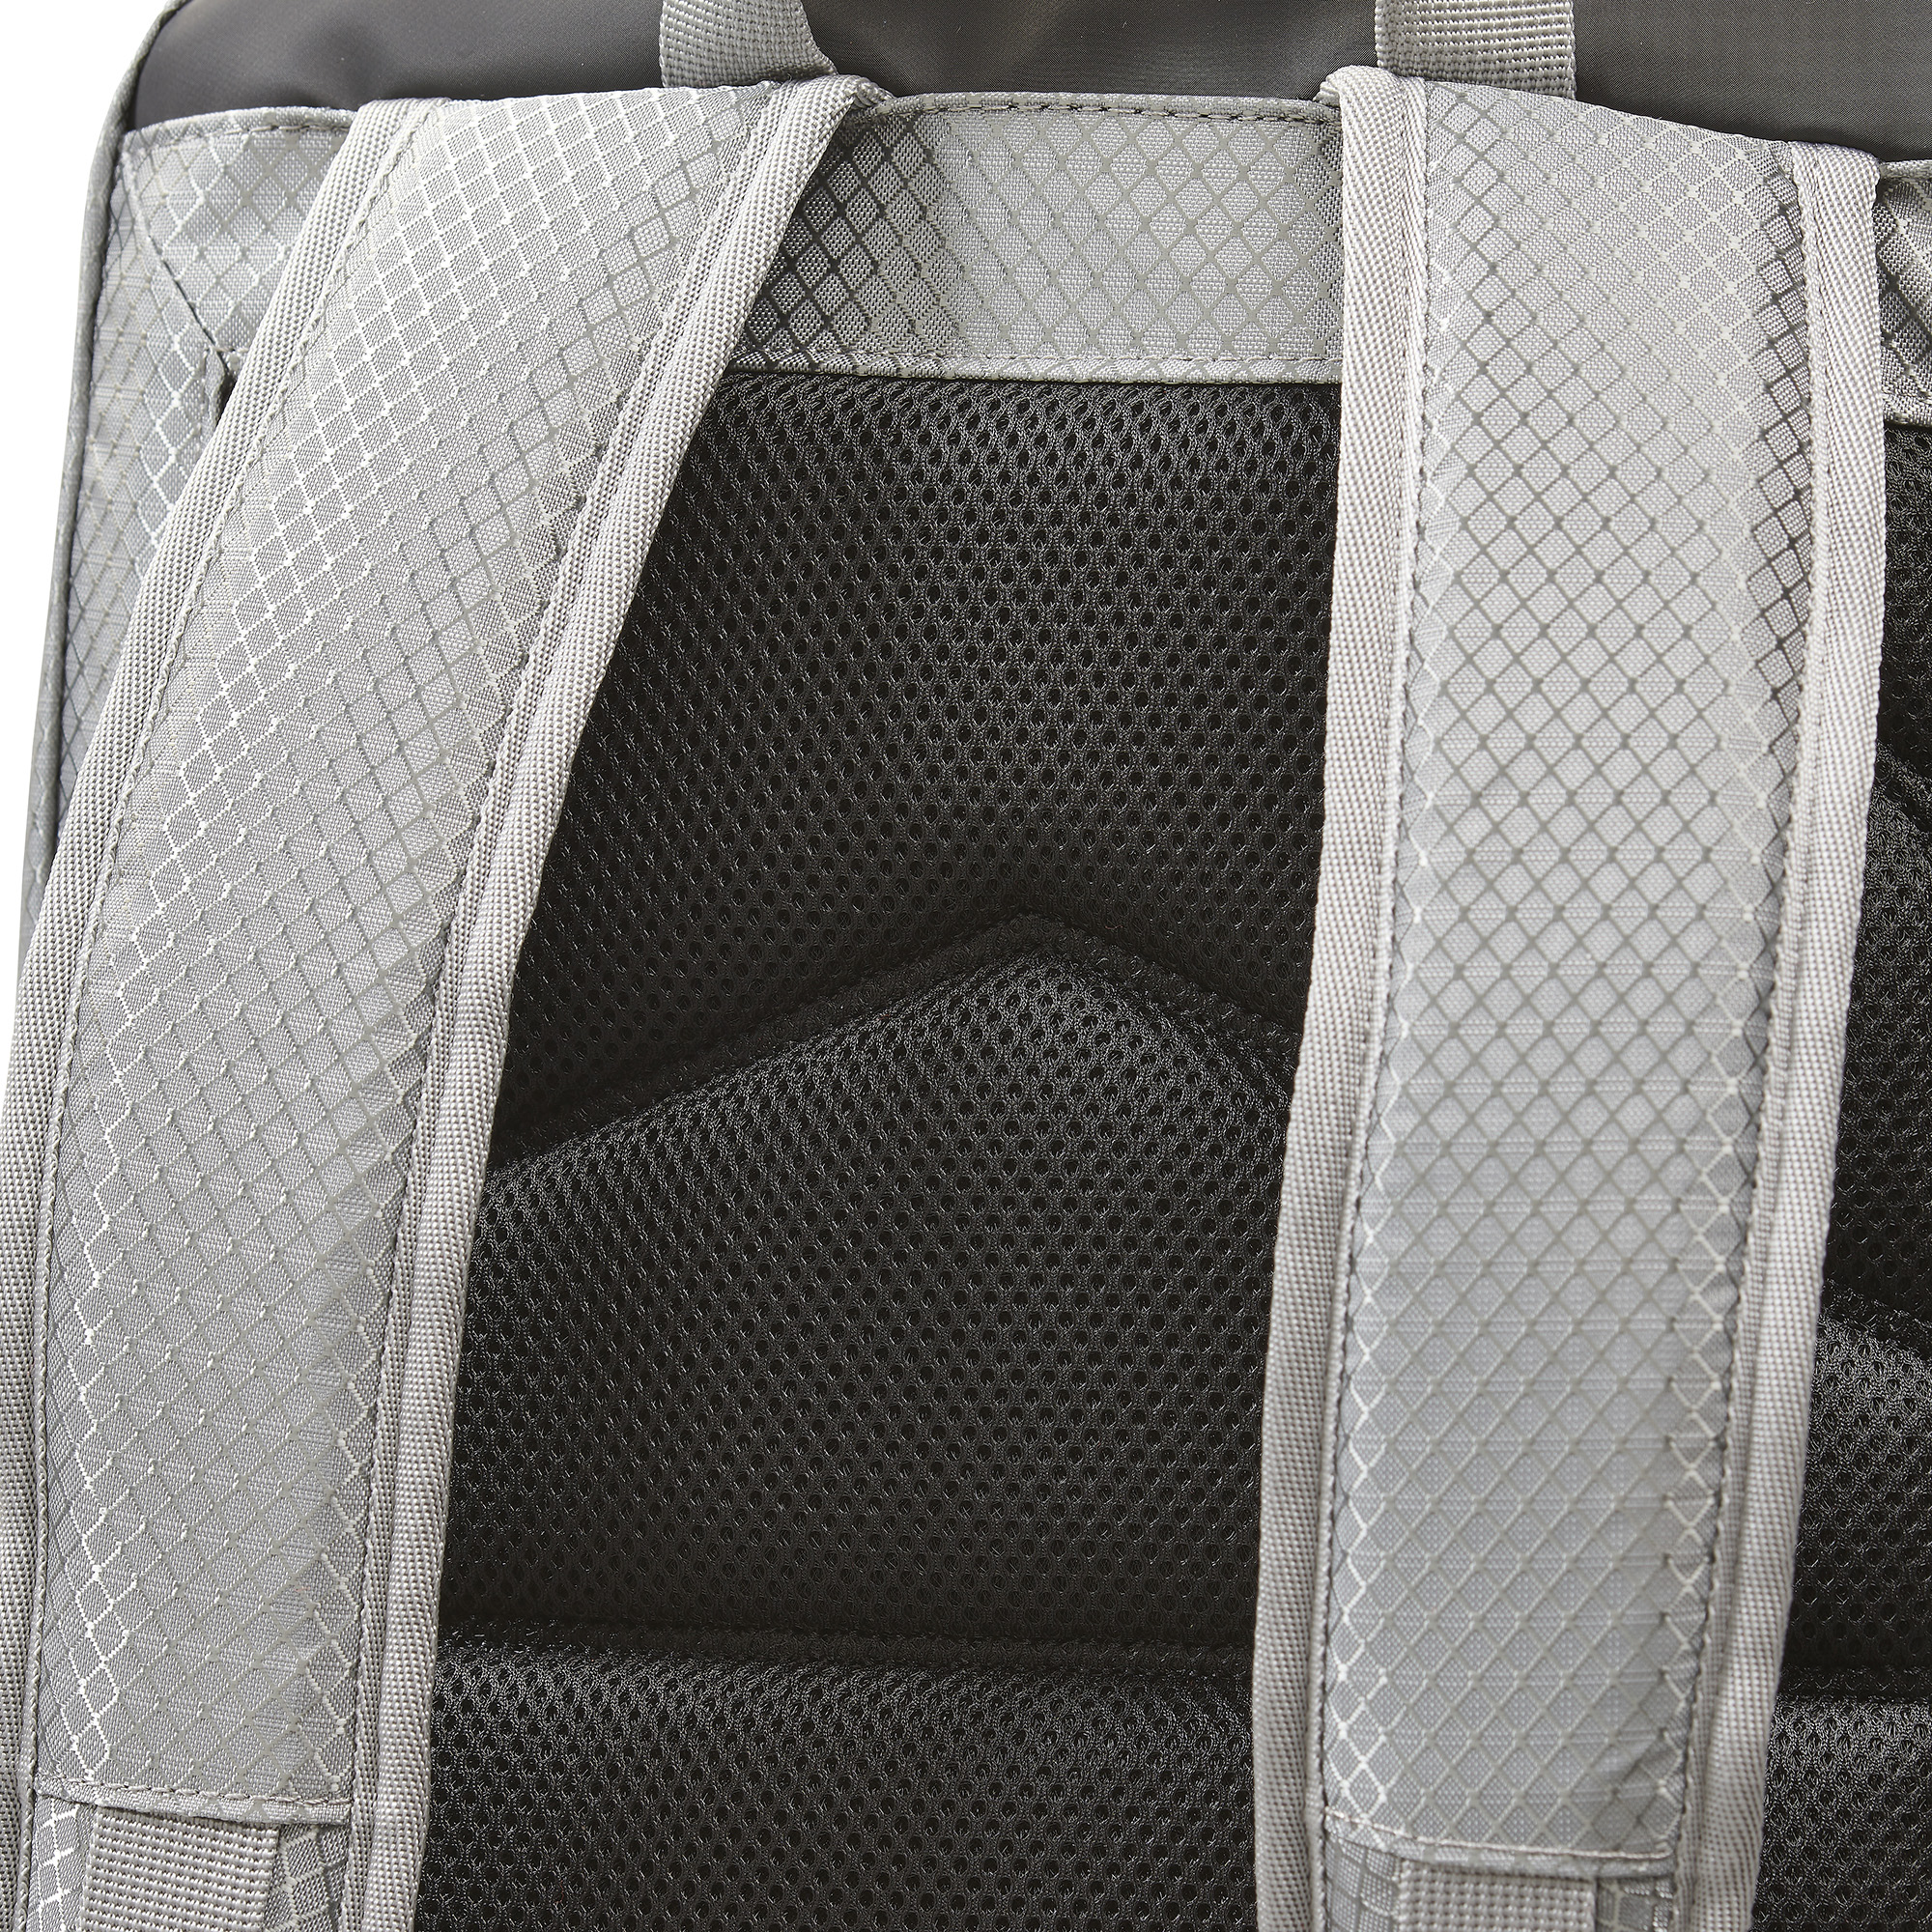 Musto Essentiall Backpack